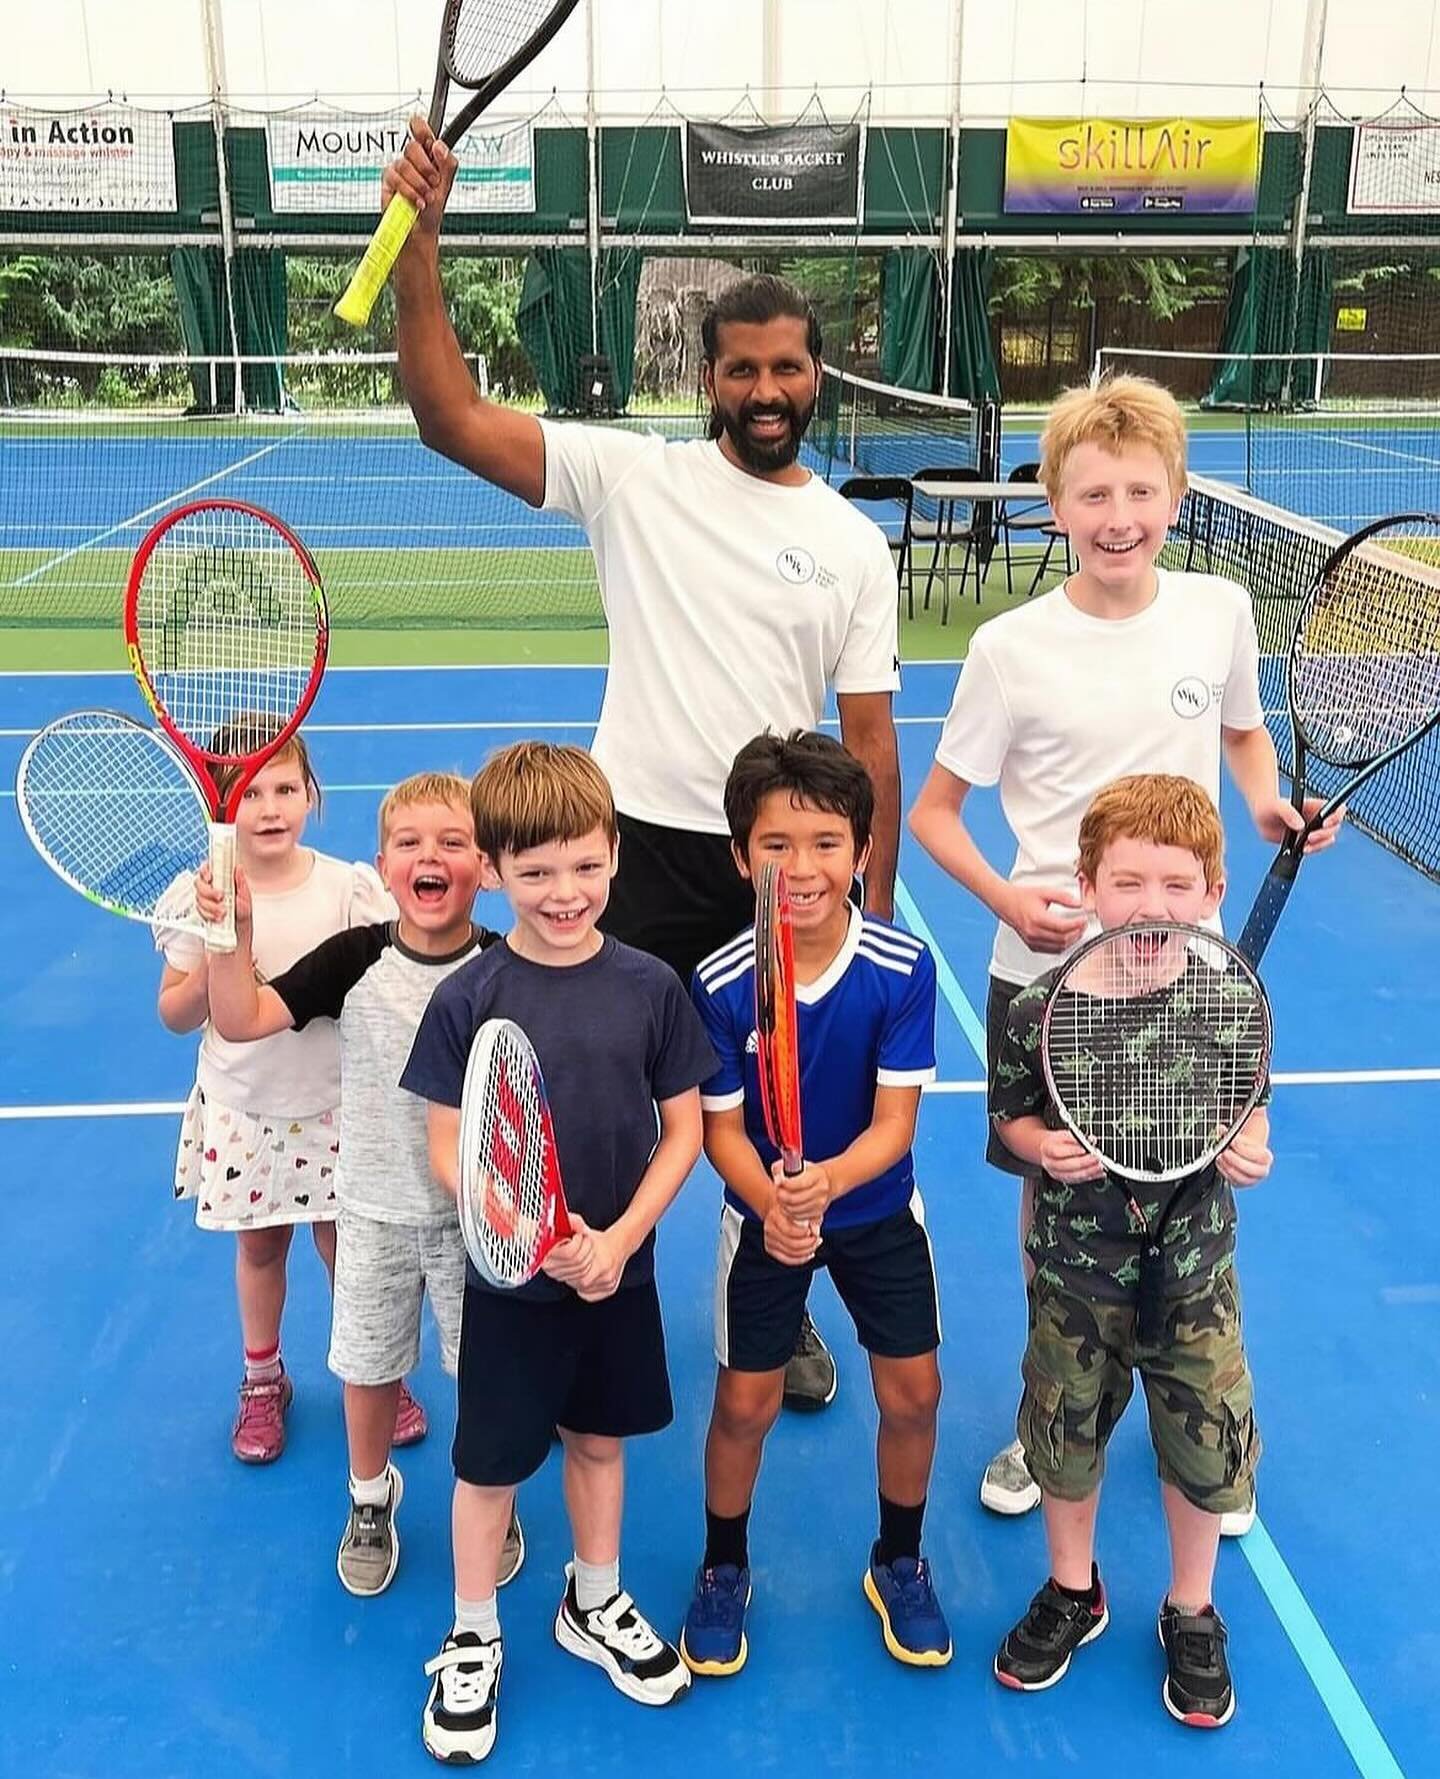 🎾 TENNIS COMBO CAMP! 🎾

Mornings spent playing tennis + afternoons doing paddle sports on Whistlers famous lakes! Summer with the WRC + @combocamps rules!!🧡💙

For over 10 years, the Whistler Racket Clubs certified coaches have ran a highly respec